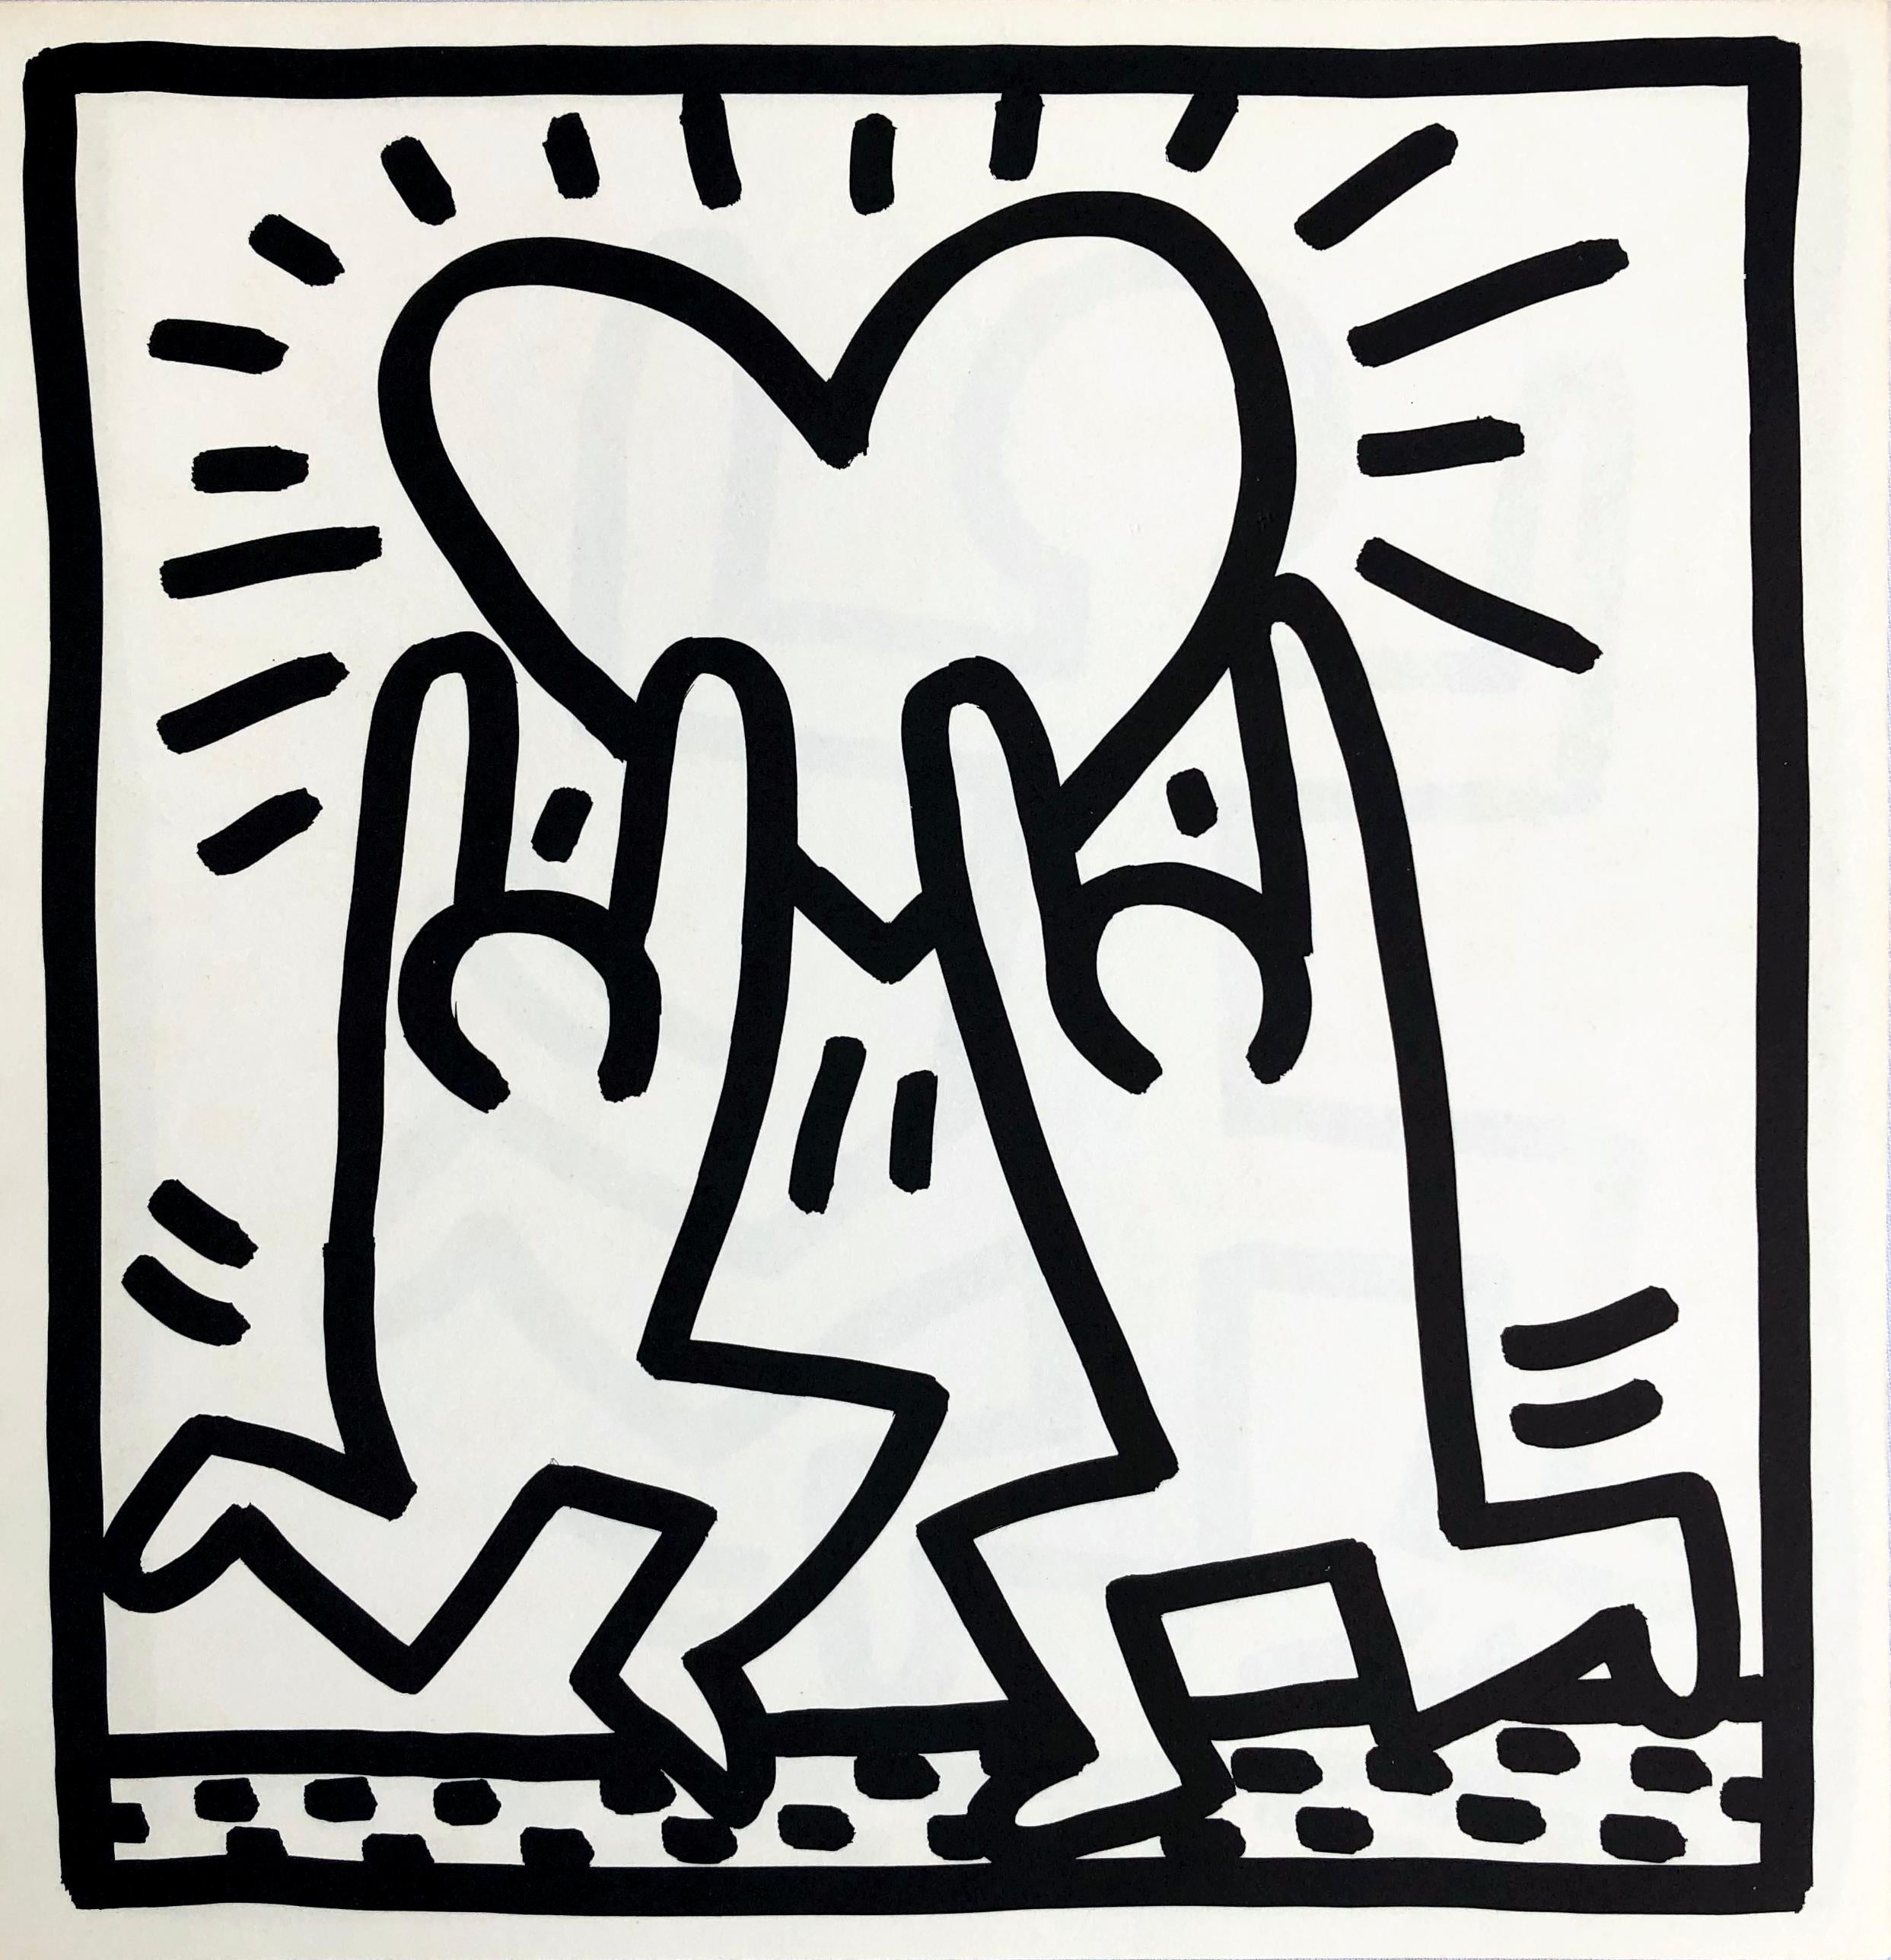 Keith Haring (untitled) Heart lithograph 1982 (Keith Haring heart) - Print by (after) Keith Haring